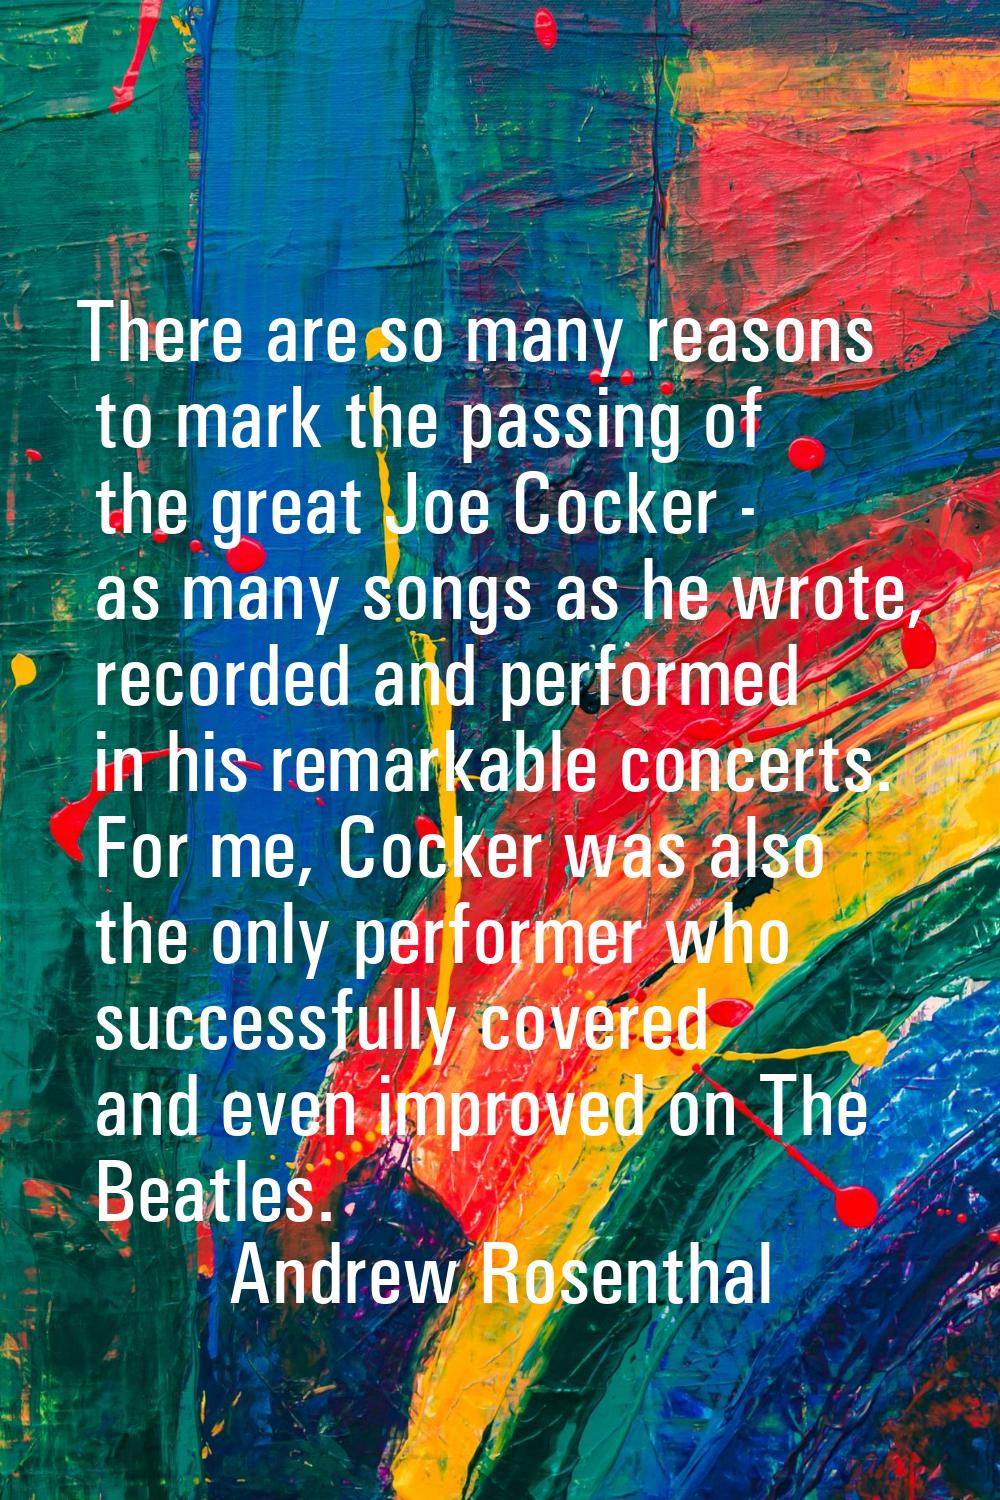 There are so many reasons to mark the passing of the great Joe Cocker - as many songs as he wrote, 